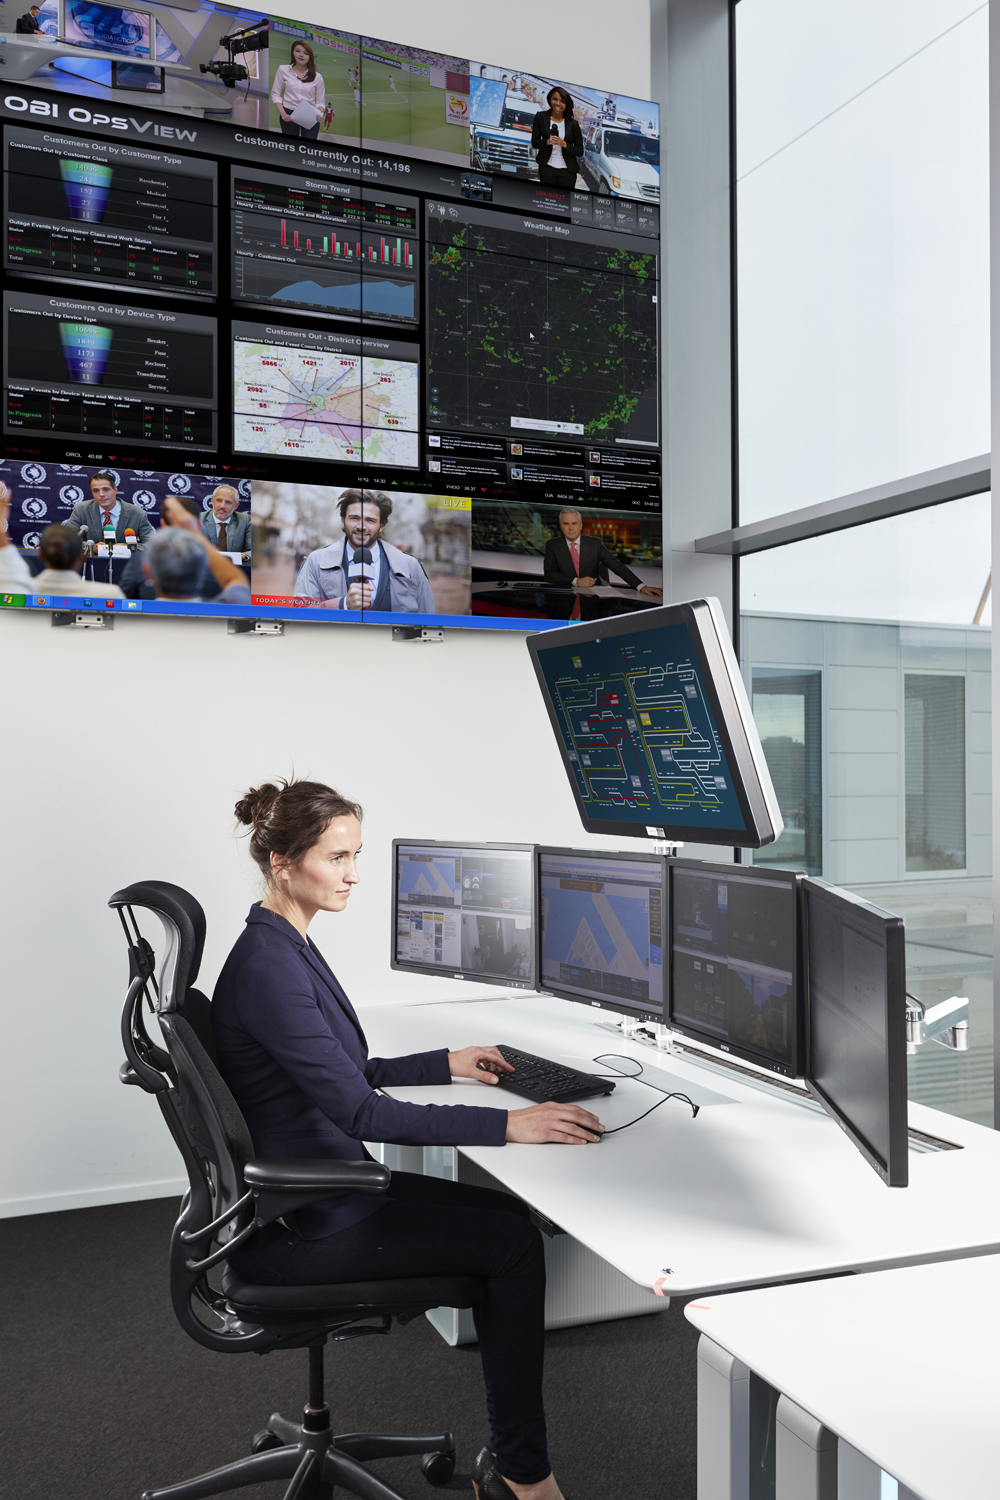 Barco: ‘The notion of a cloud-connected control room will gain exponential acceptance’